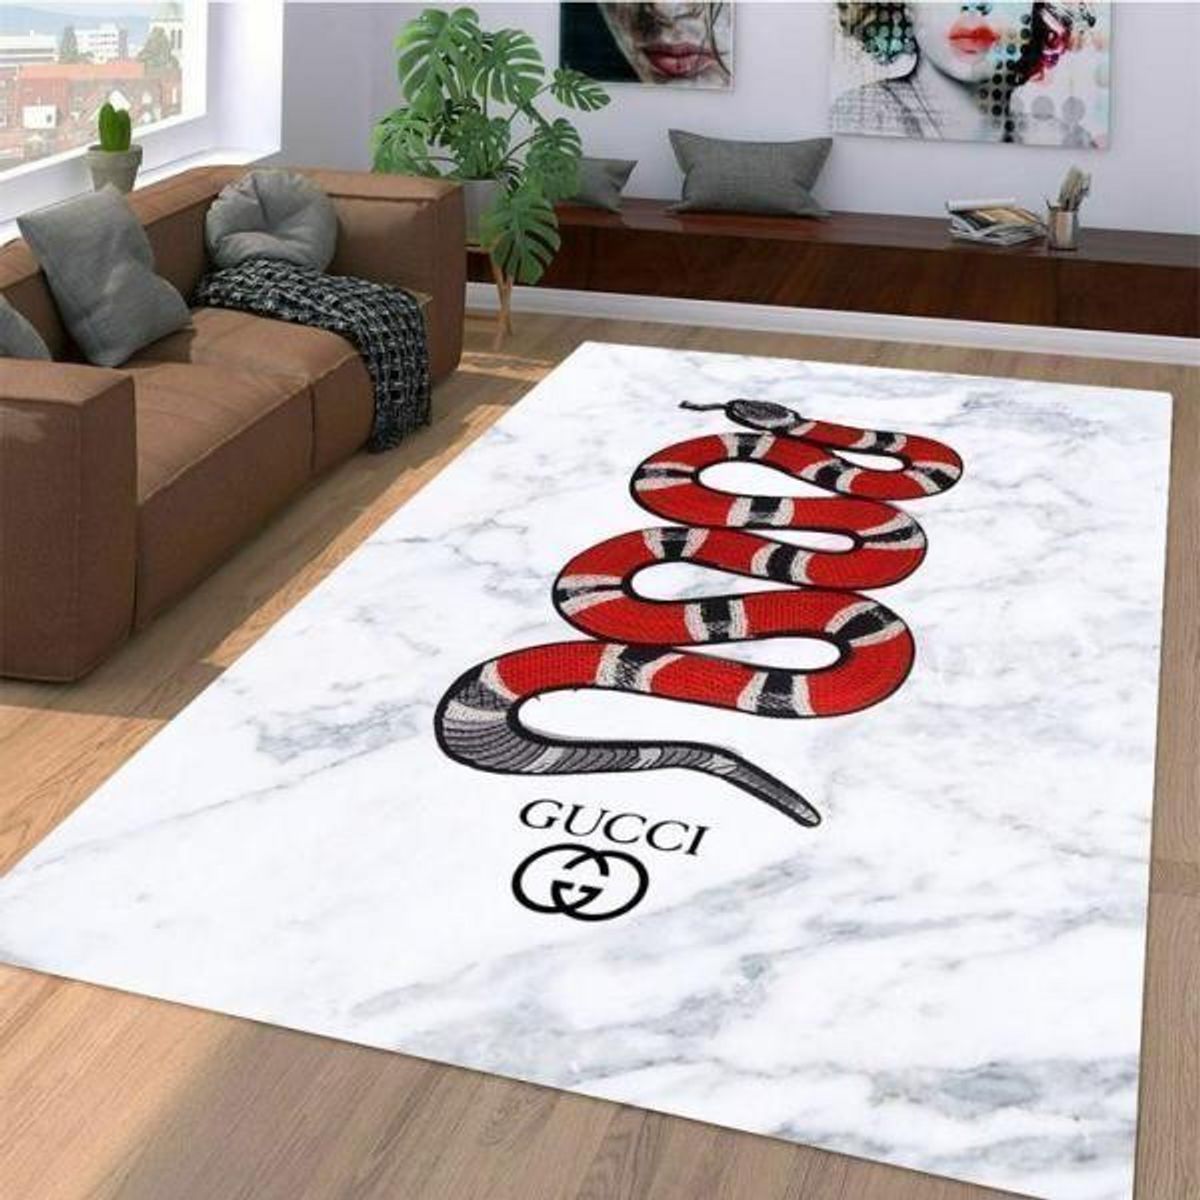 Gucci Red Snake Luxury Brand Carpet Rug Limited Edition